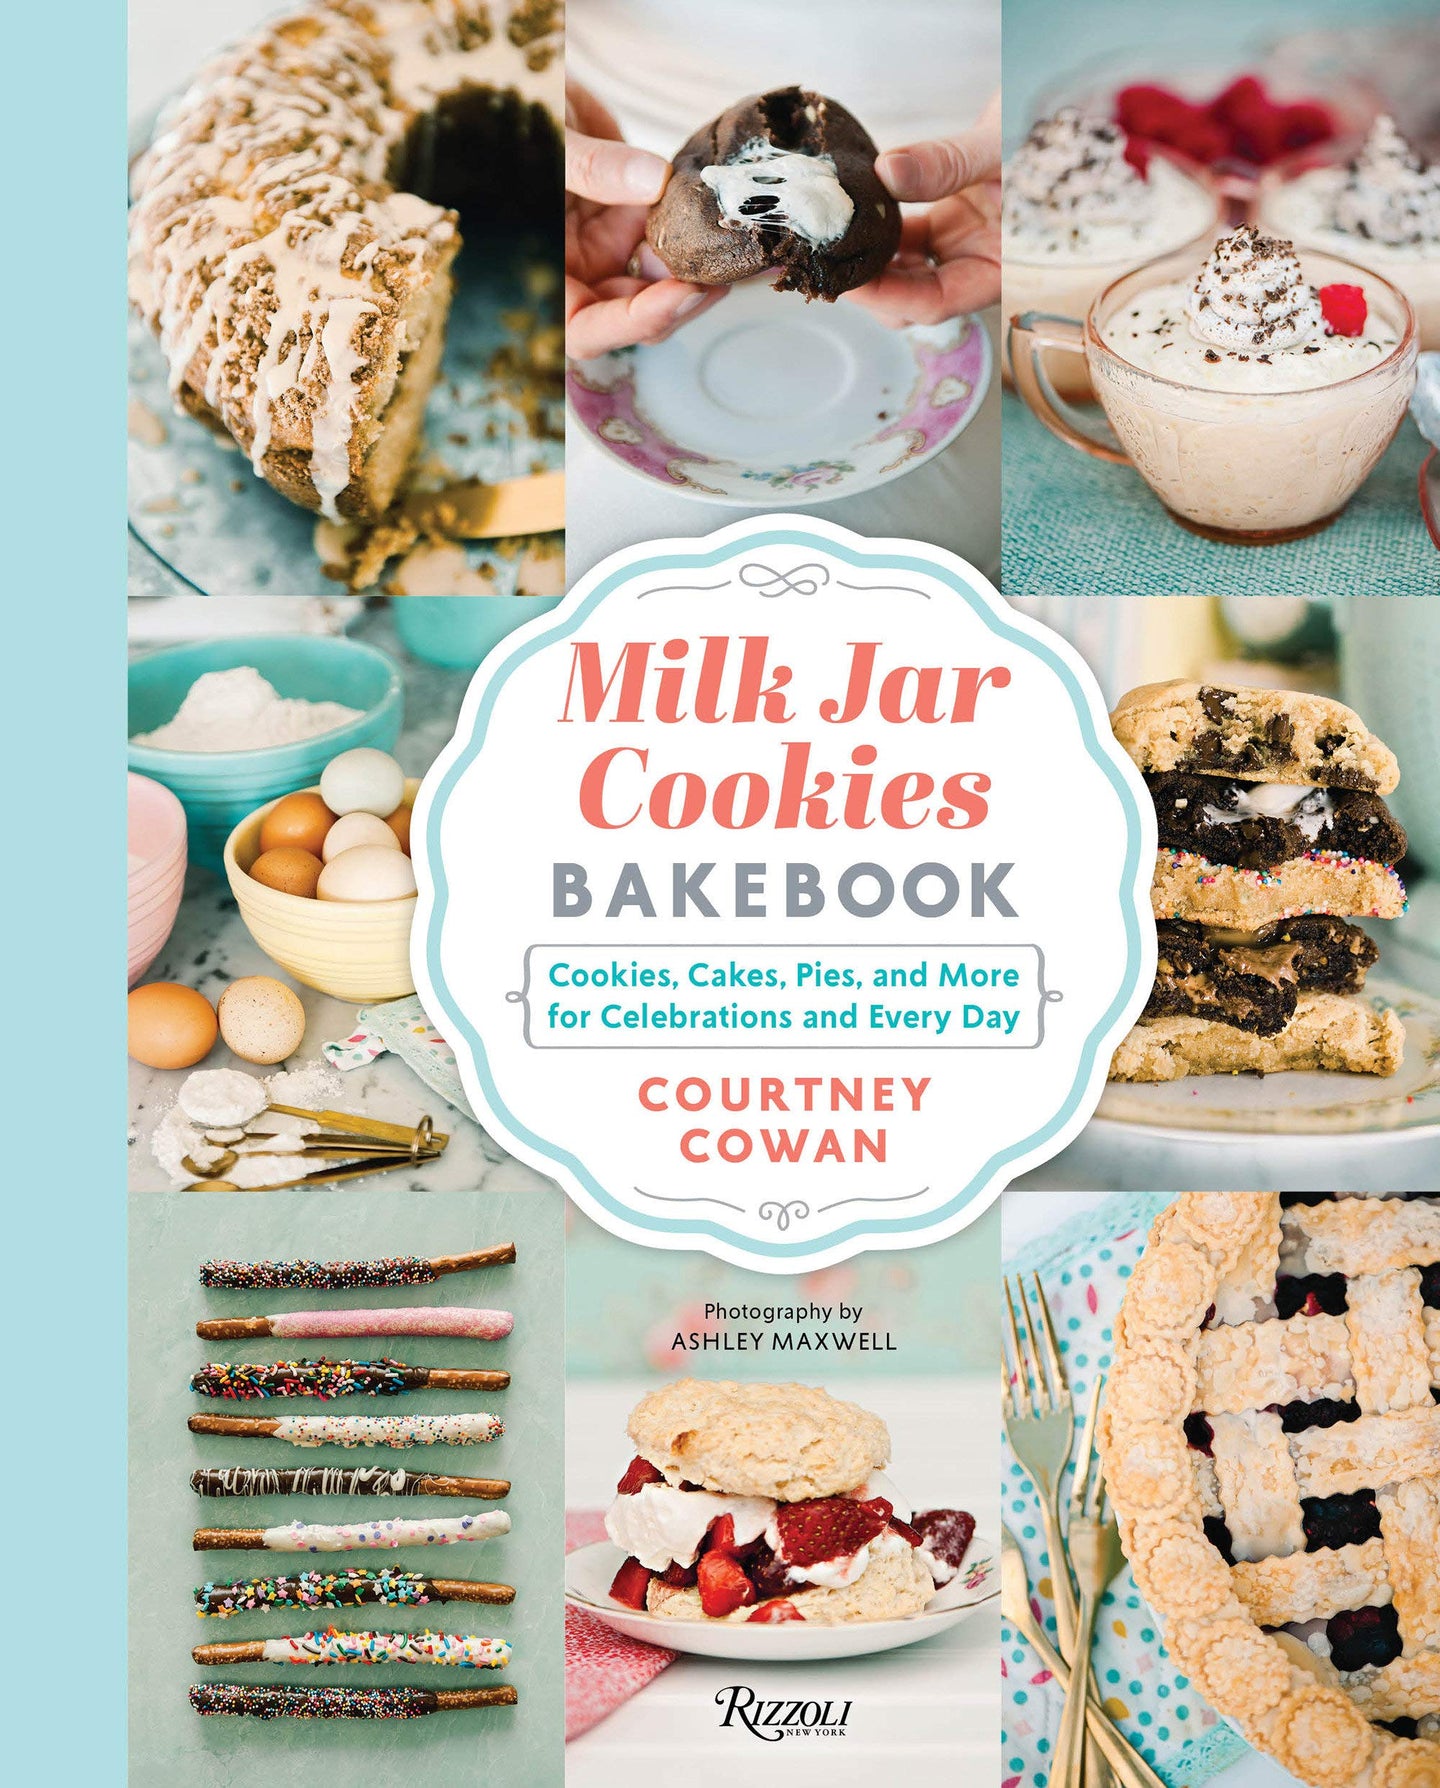 Milk Jar Cookies Bakebook: Cookies, Cakes, Pies, and More for Celebrations and Every Day